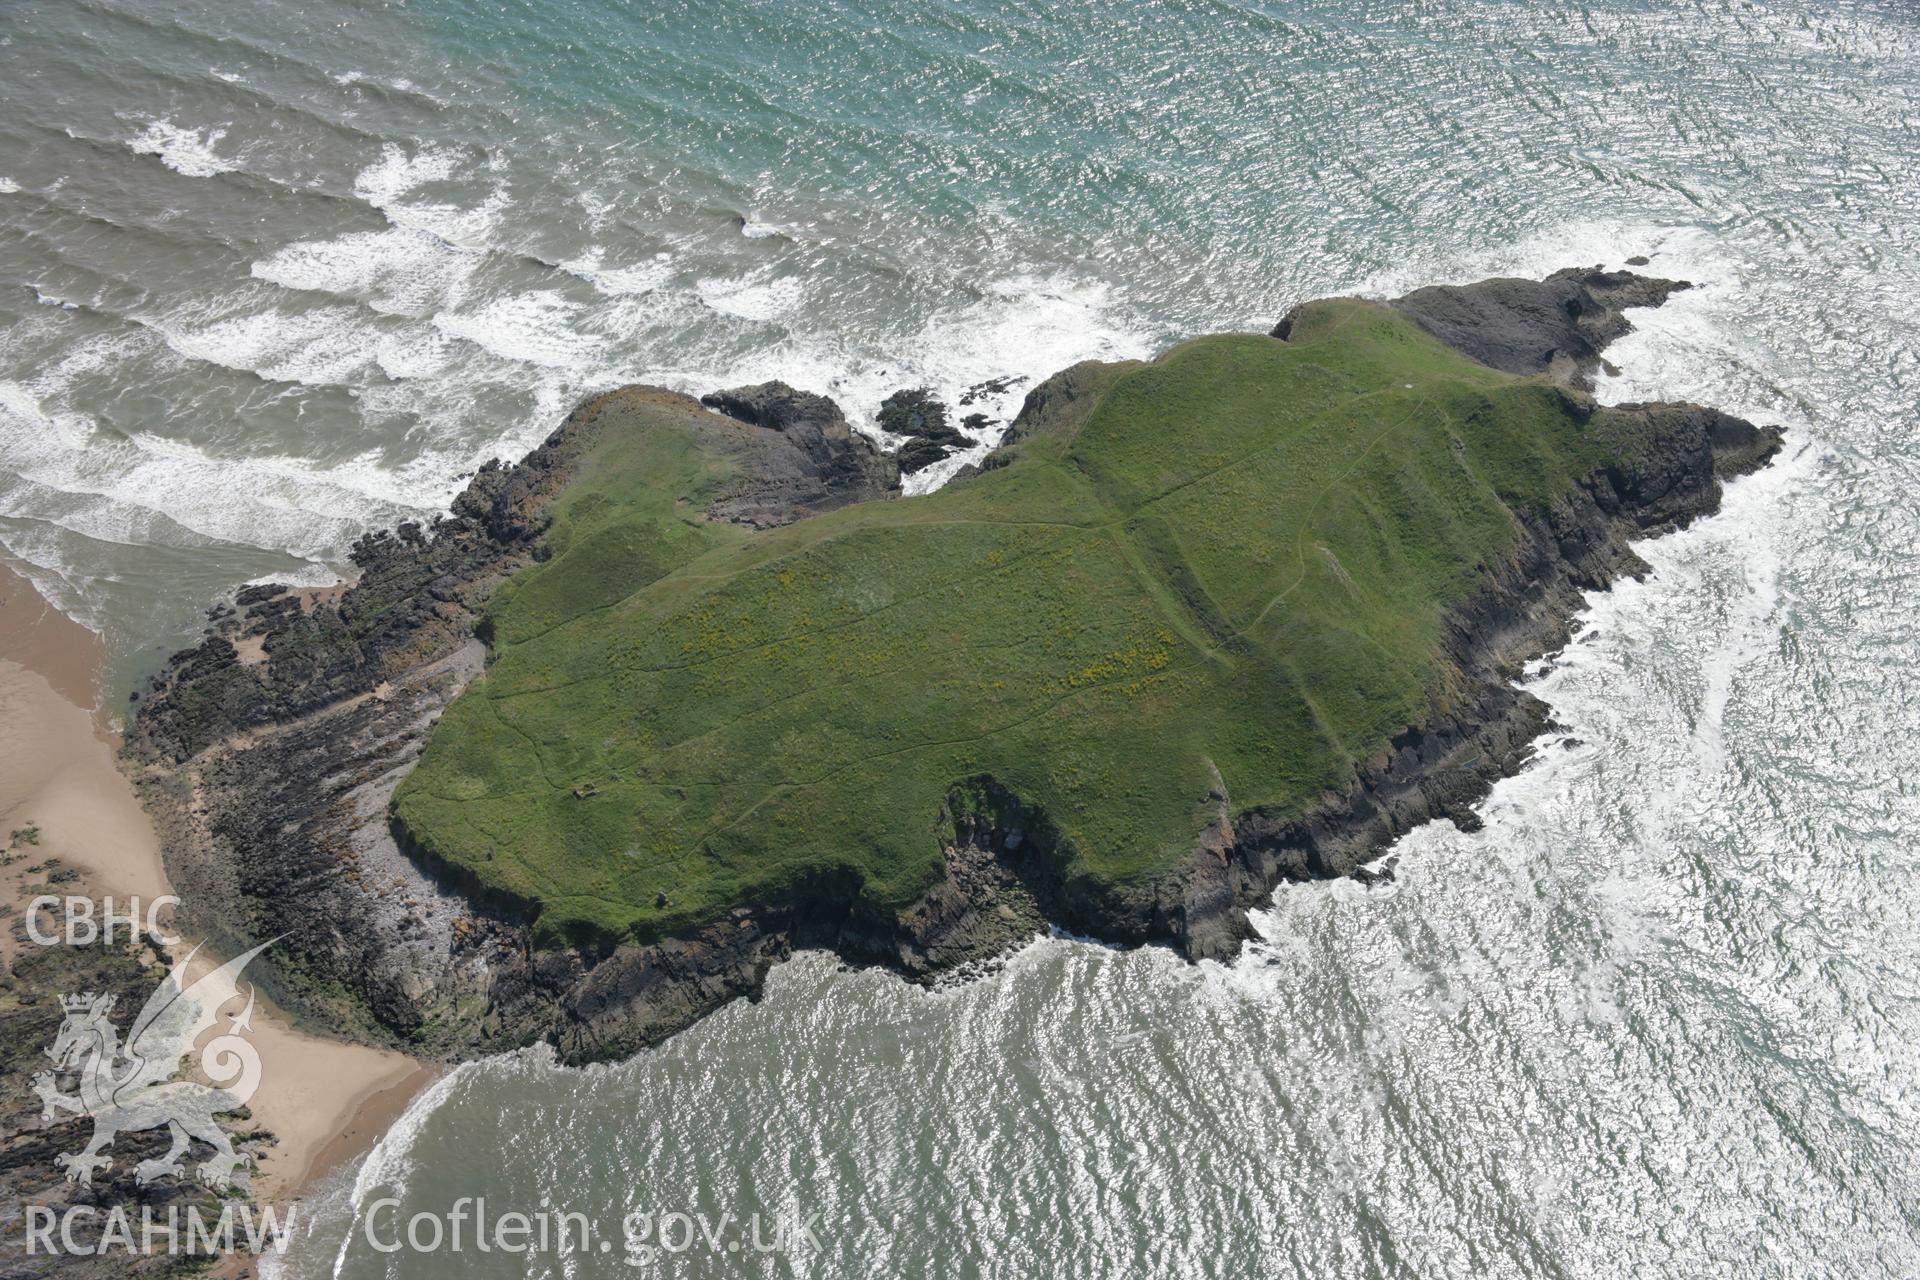 RCAHMW colour oblique aerial photograph of Burry Holms Promontory Fort. Taken on 11 July 2006 by Toby Driver.